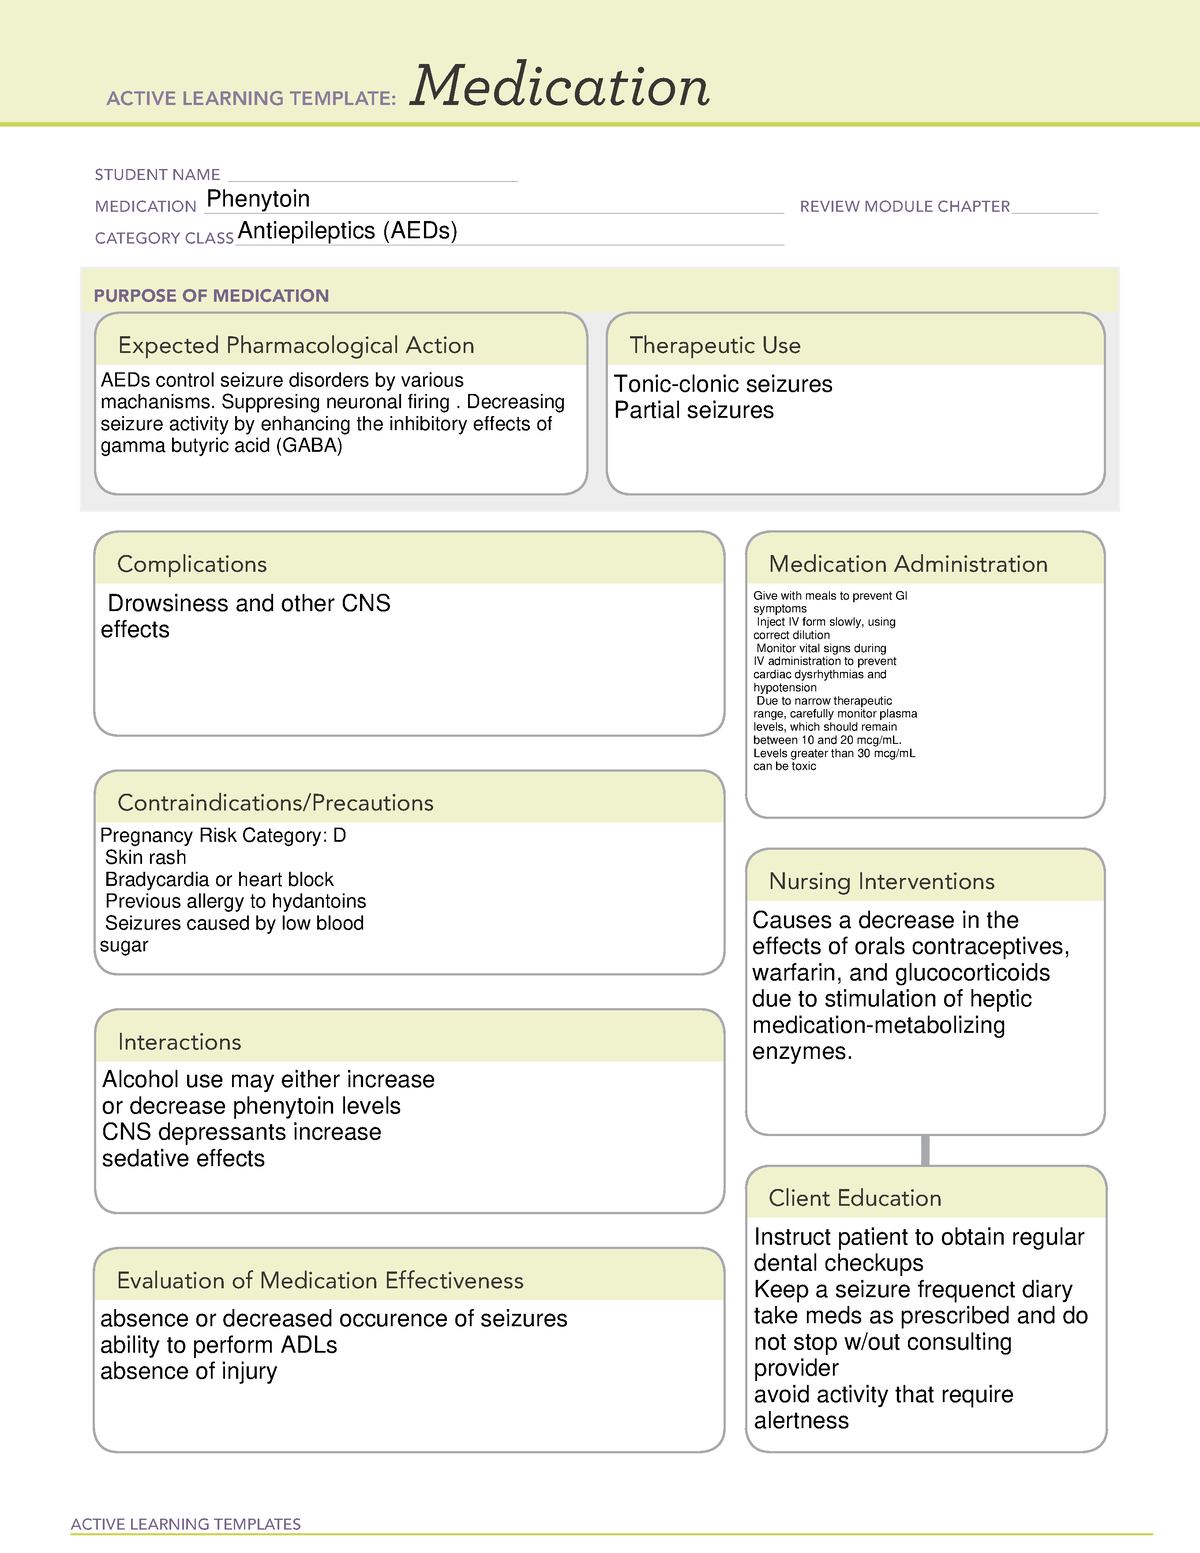 ATI Medication Card Template Phenytoin ACTIVE LEARNING TEMPLATES